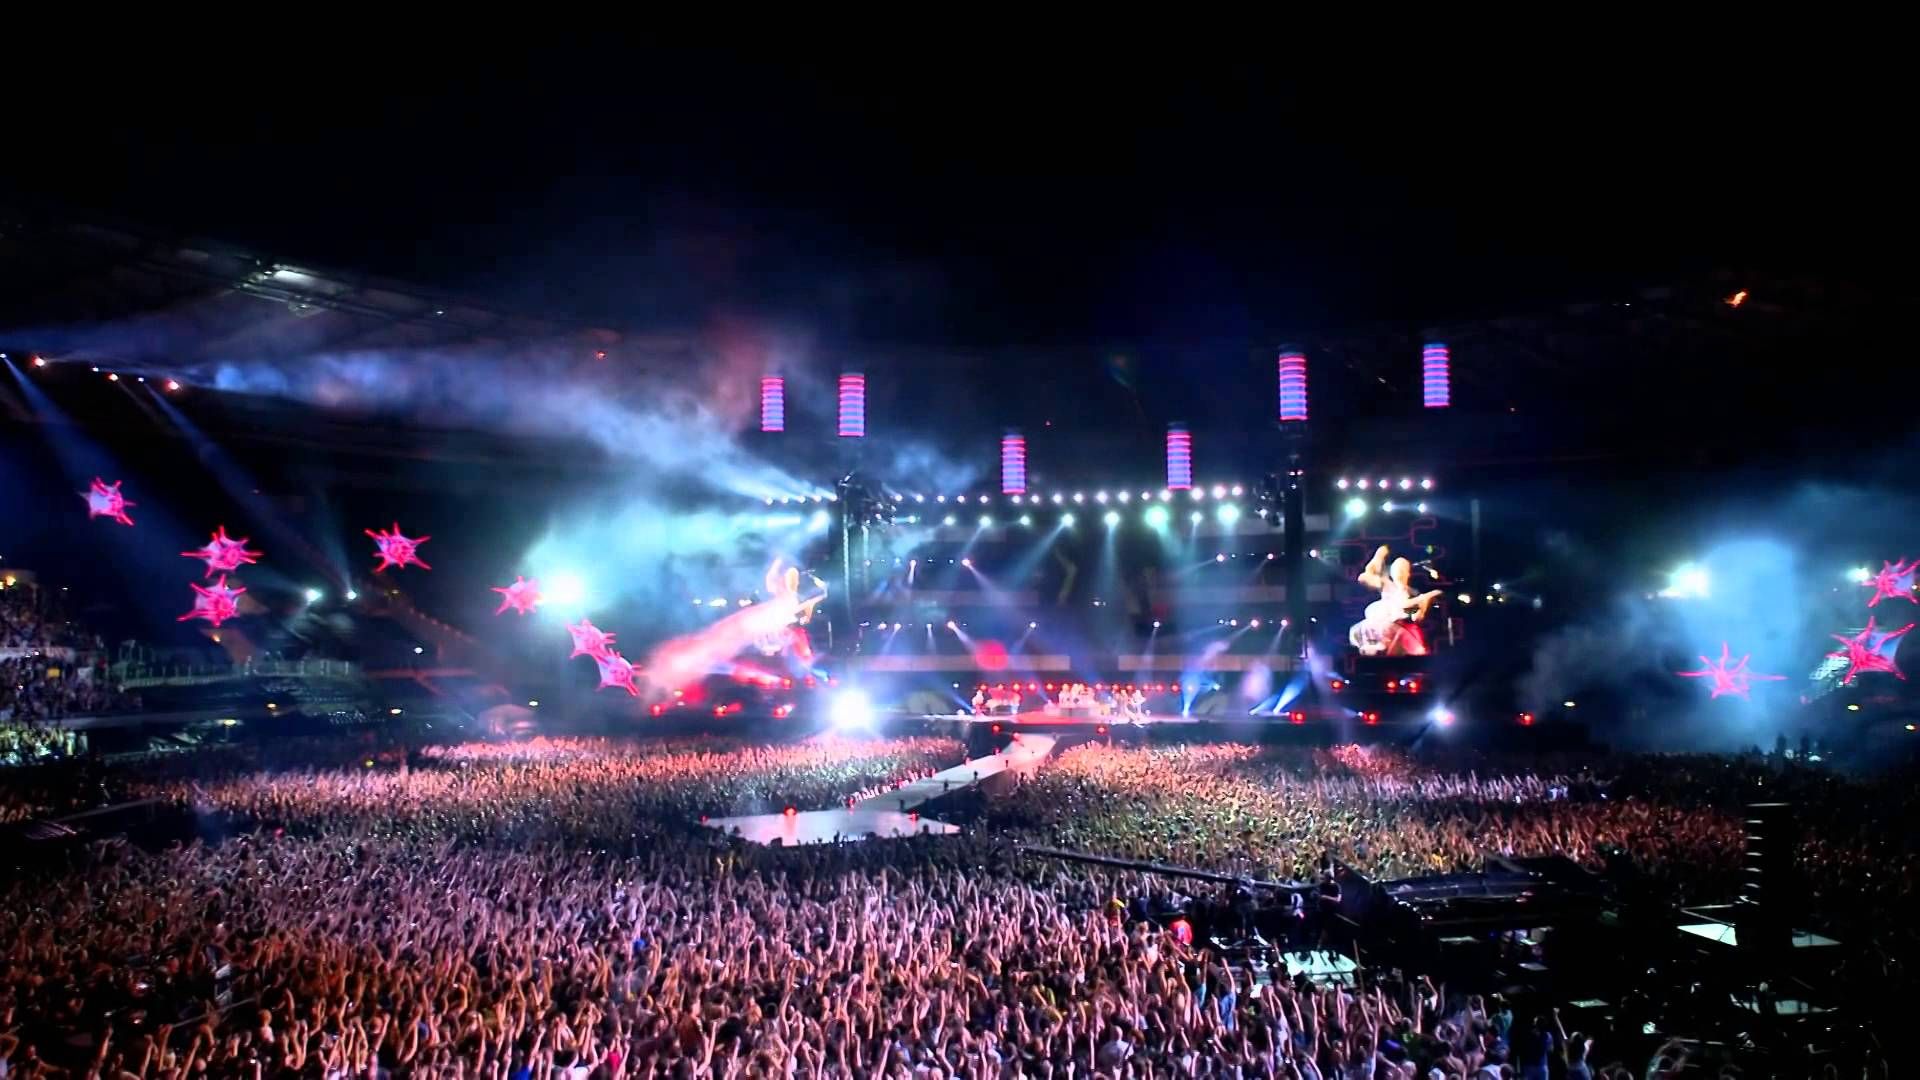 Muse Live At Rome Olympic Stadium Full HD 1080p